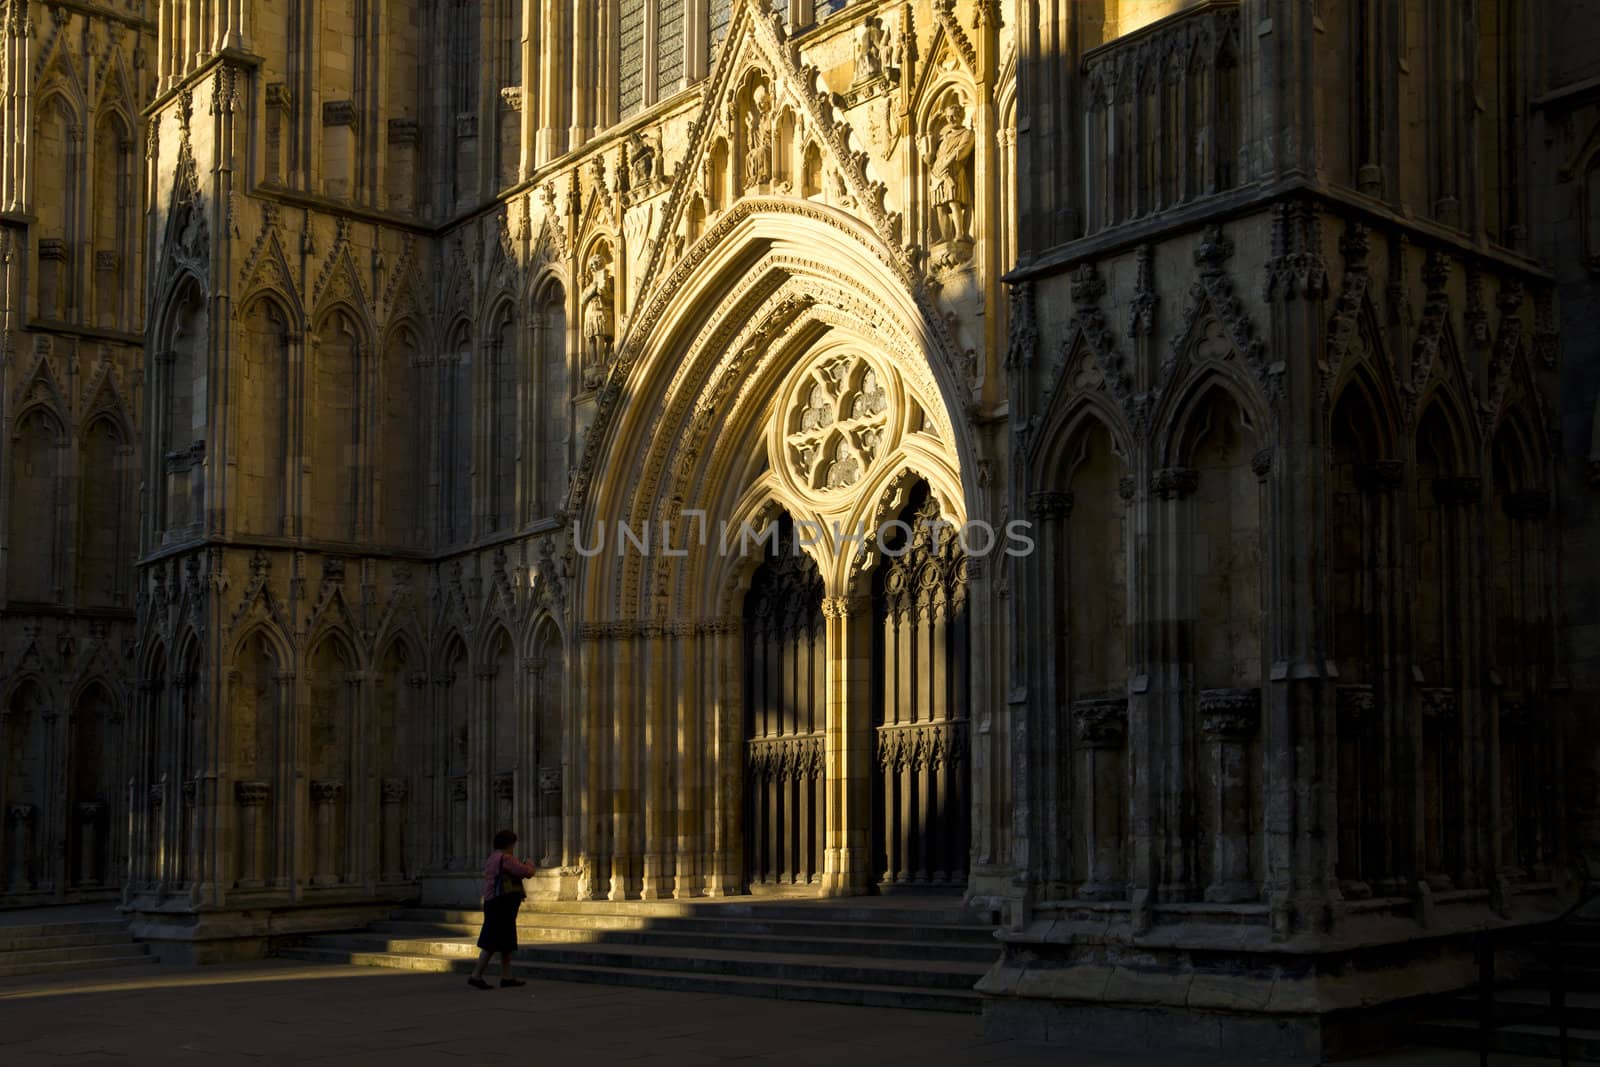 A lady standing humbly before the architecturally magnificent York Minster